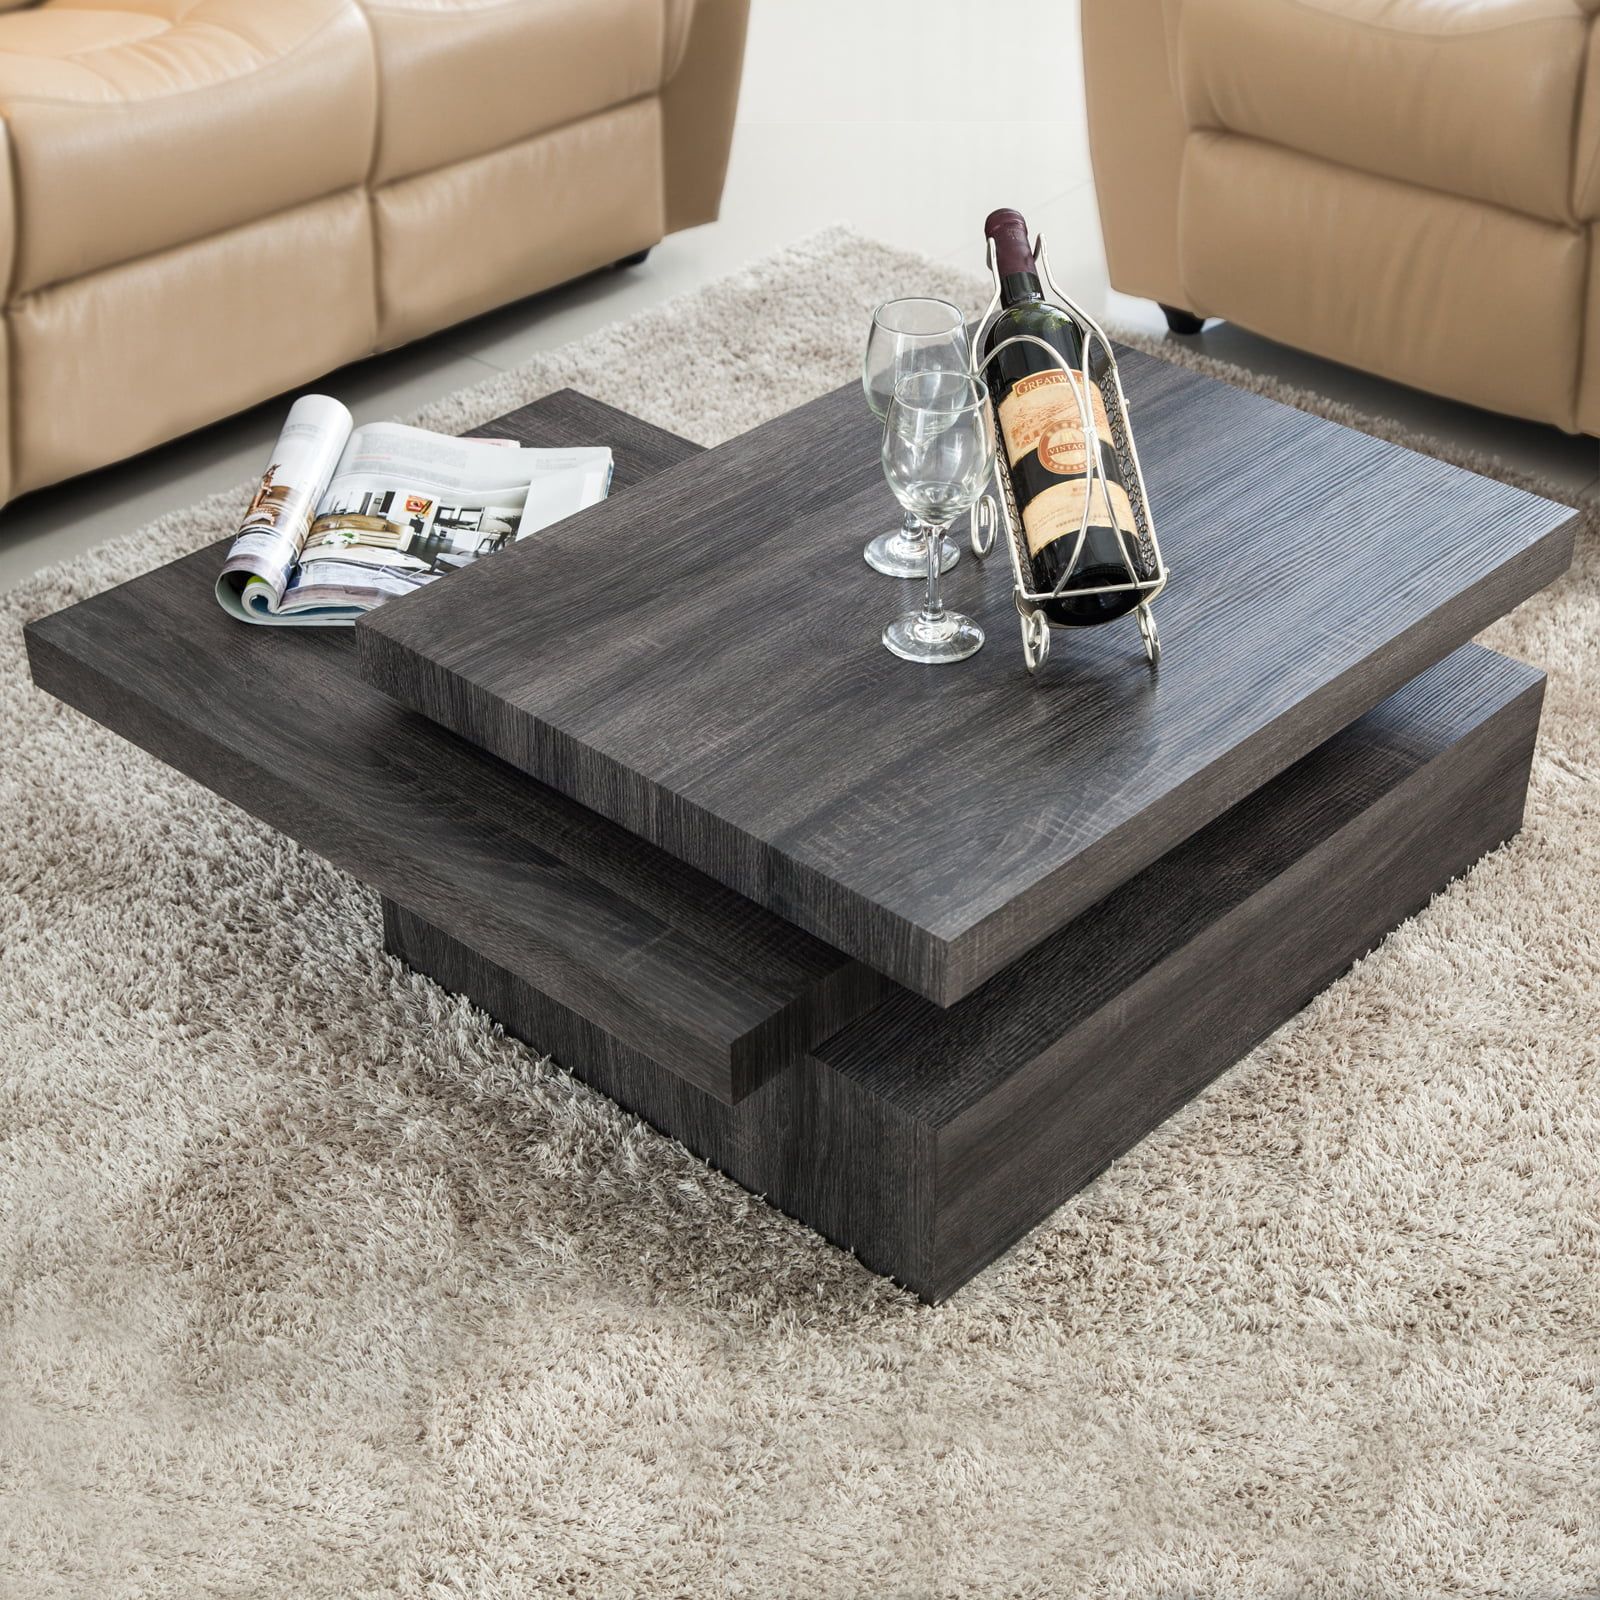 Oak Square Rotating Wood Coffee Table With 3 Layers Home Living Room Throughout Transitional Square Coffee Tables (View 18 of 20)